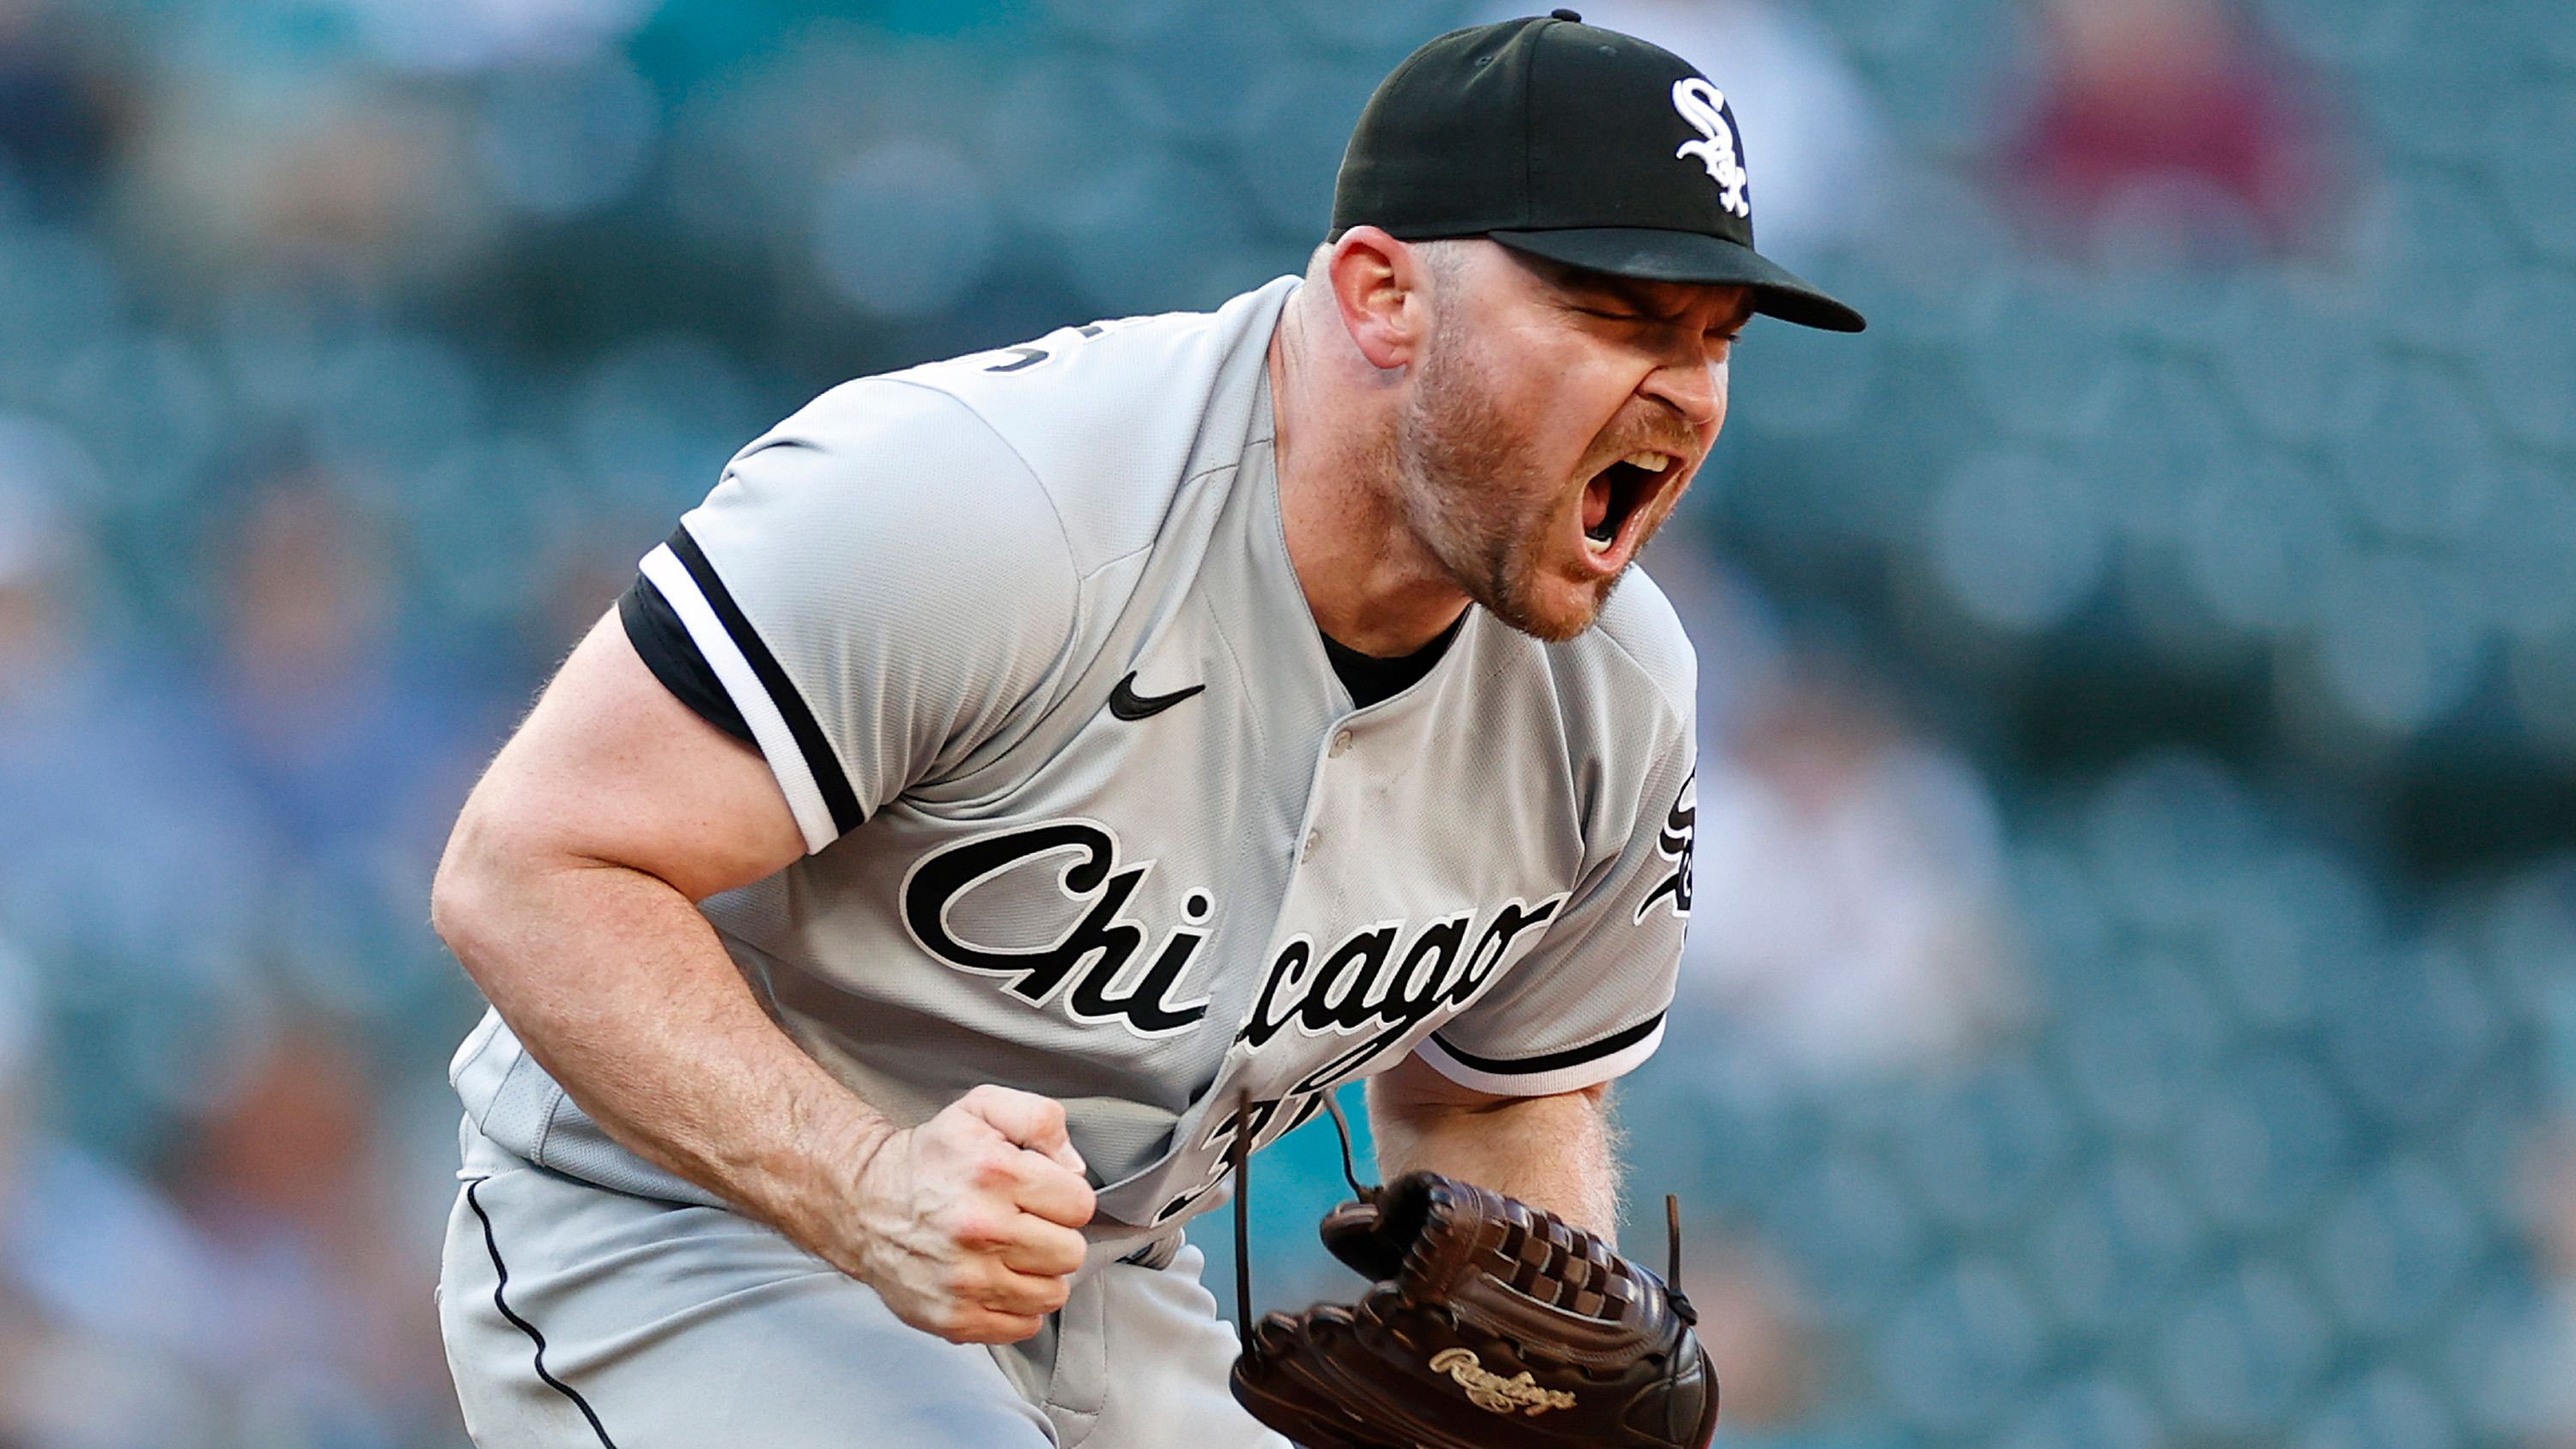 Liam Hendriks #31 of the Chicago White Sox reacts after the final out to beat Seattle Mariners 9-6 at T-Mobile Park on September 07, 2022 in Seattle, Washington. (Photo by Steph Chambers/Getty Images)